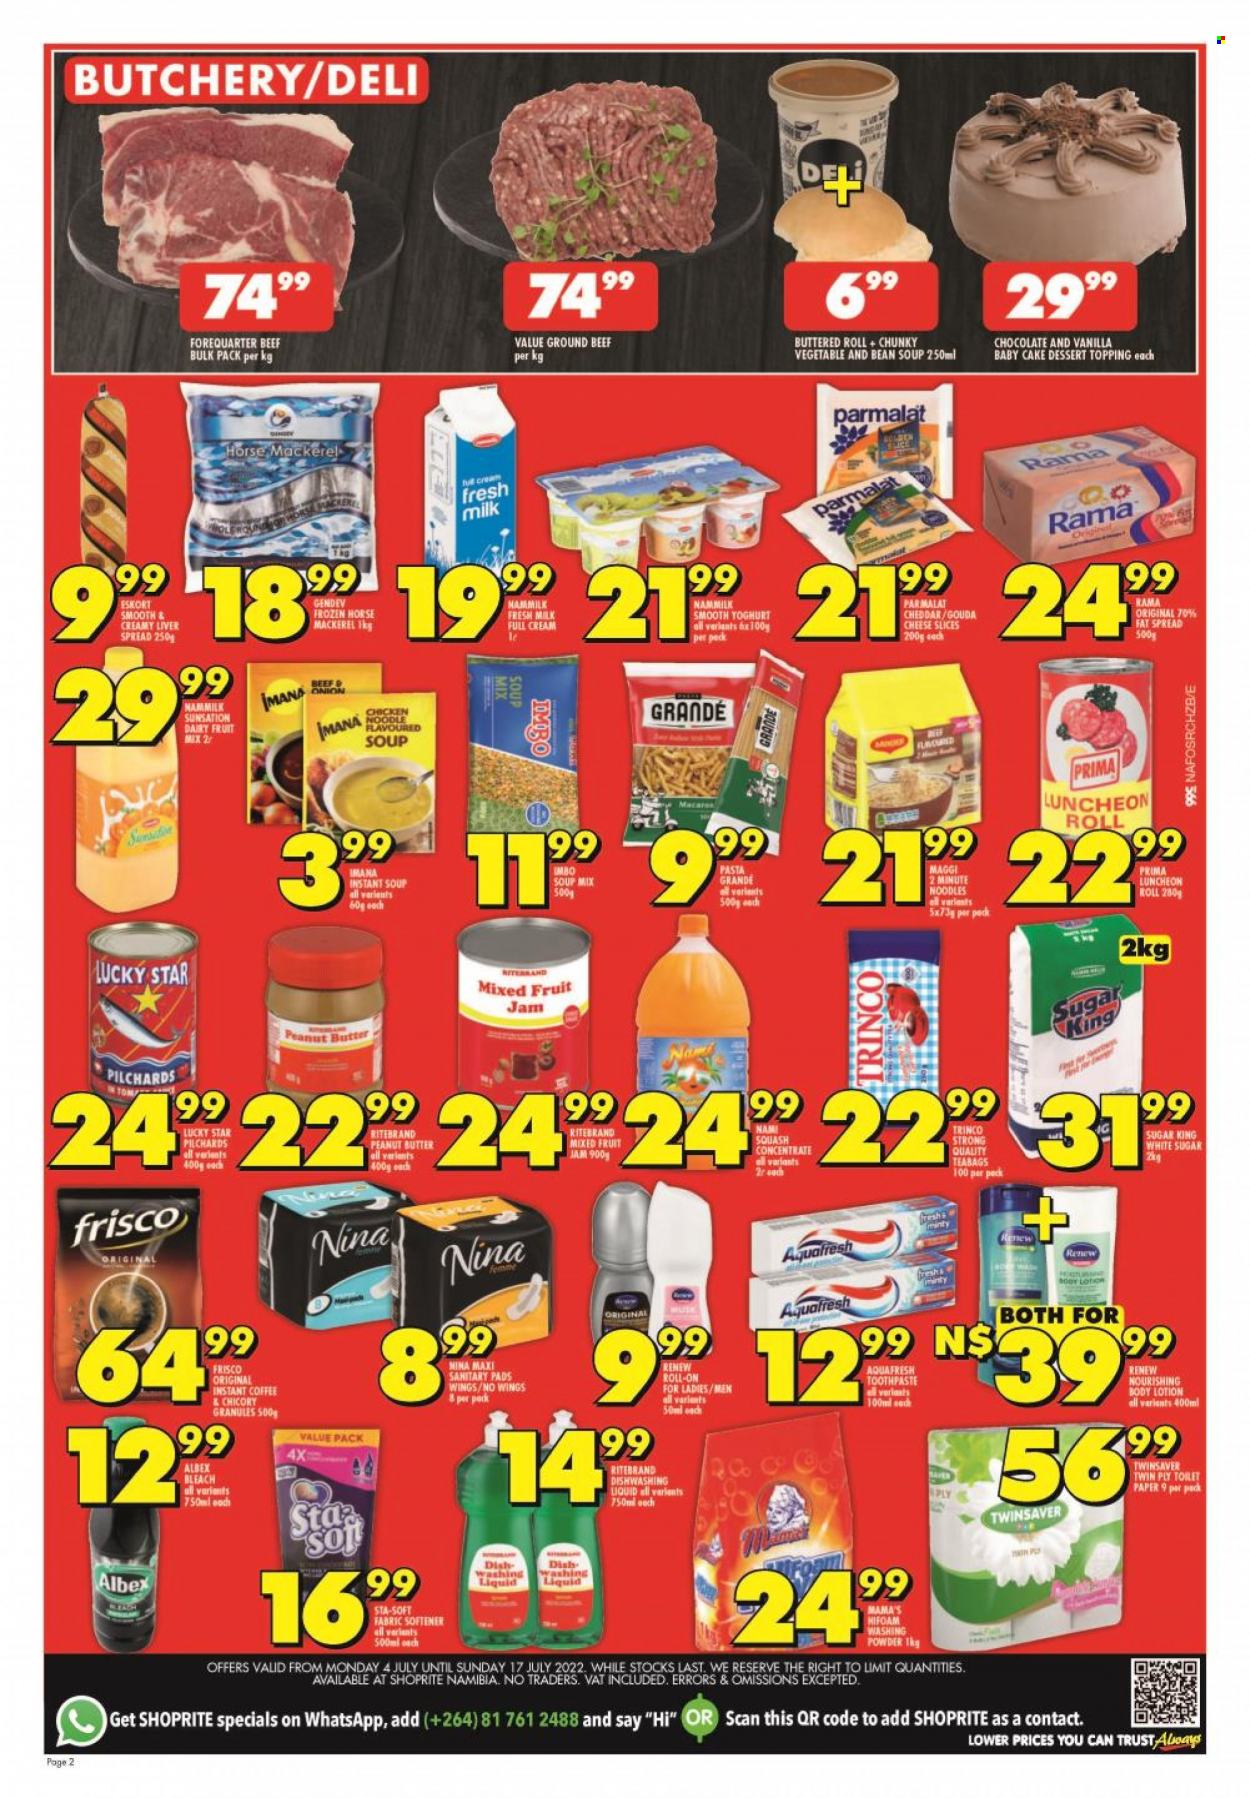 Shoprite catalogue  - 04/07/2022 - 17/07/2022 - Sales products - cake, mackerel, sardines, soup mix, condensed soup, soup, pasta, noodles, instant soup, Mama's, lunch meat, gouda, sliced cheese, cheddar, cheese, yoghurt, Parmalat, milk, fat spread, Rama, fruit mix, sugar, Maggi, topping, Pasta Grandé, fruit jam, peanut butter, instant coffee, Frisco, beef meat, ground beef, toilet paper, bleach, fabric softener, laundry powder, dishwashing liquid, toothpaste, sanitary pads, body lotion. Page 2.